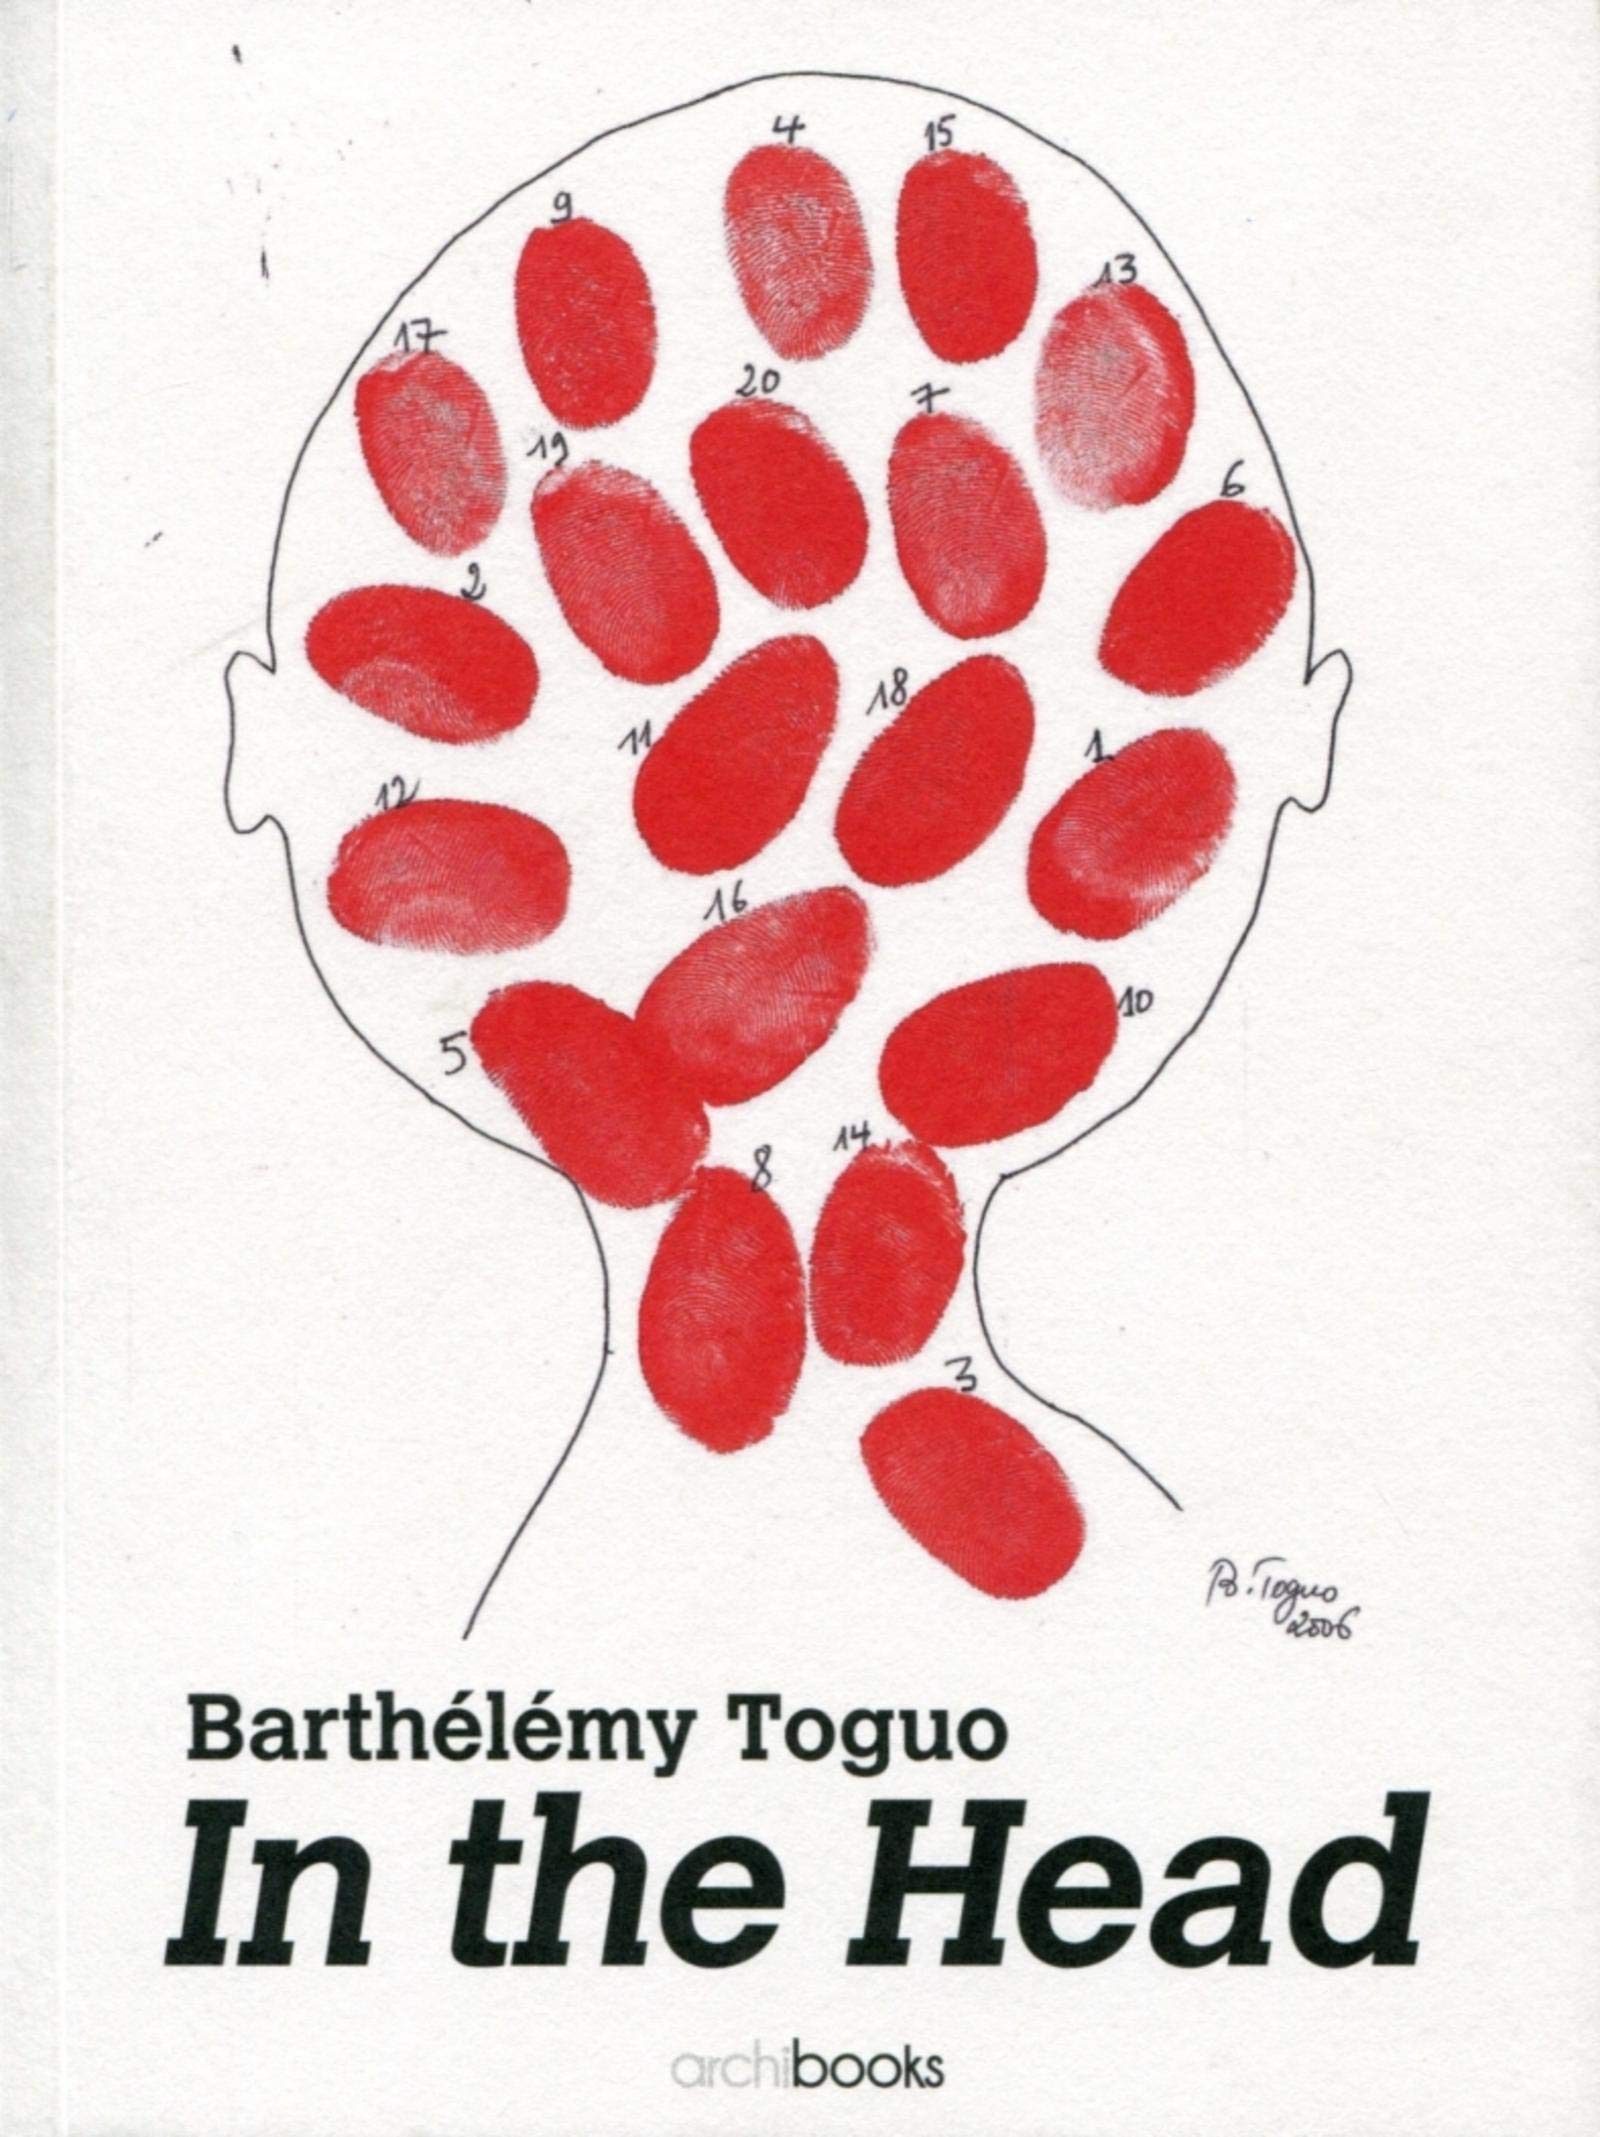 Barthlmy Toguo: In the Head